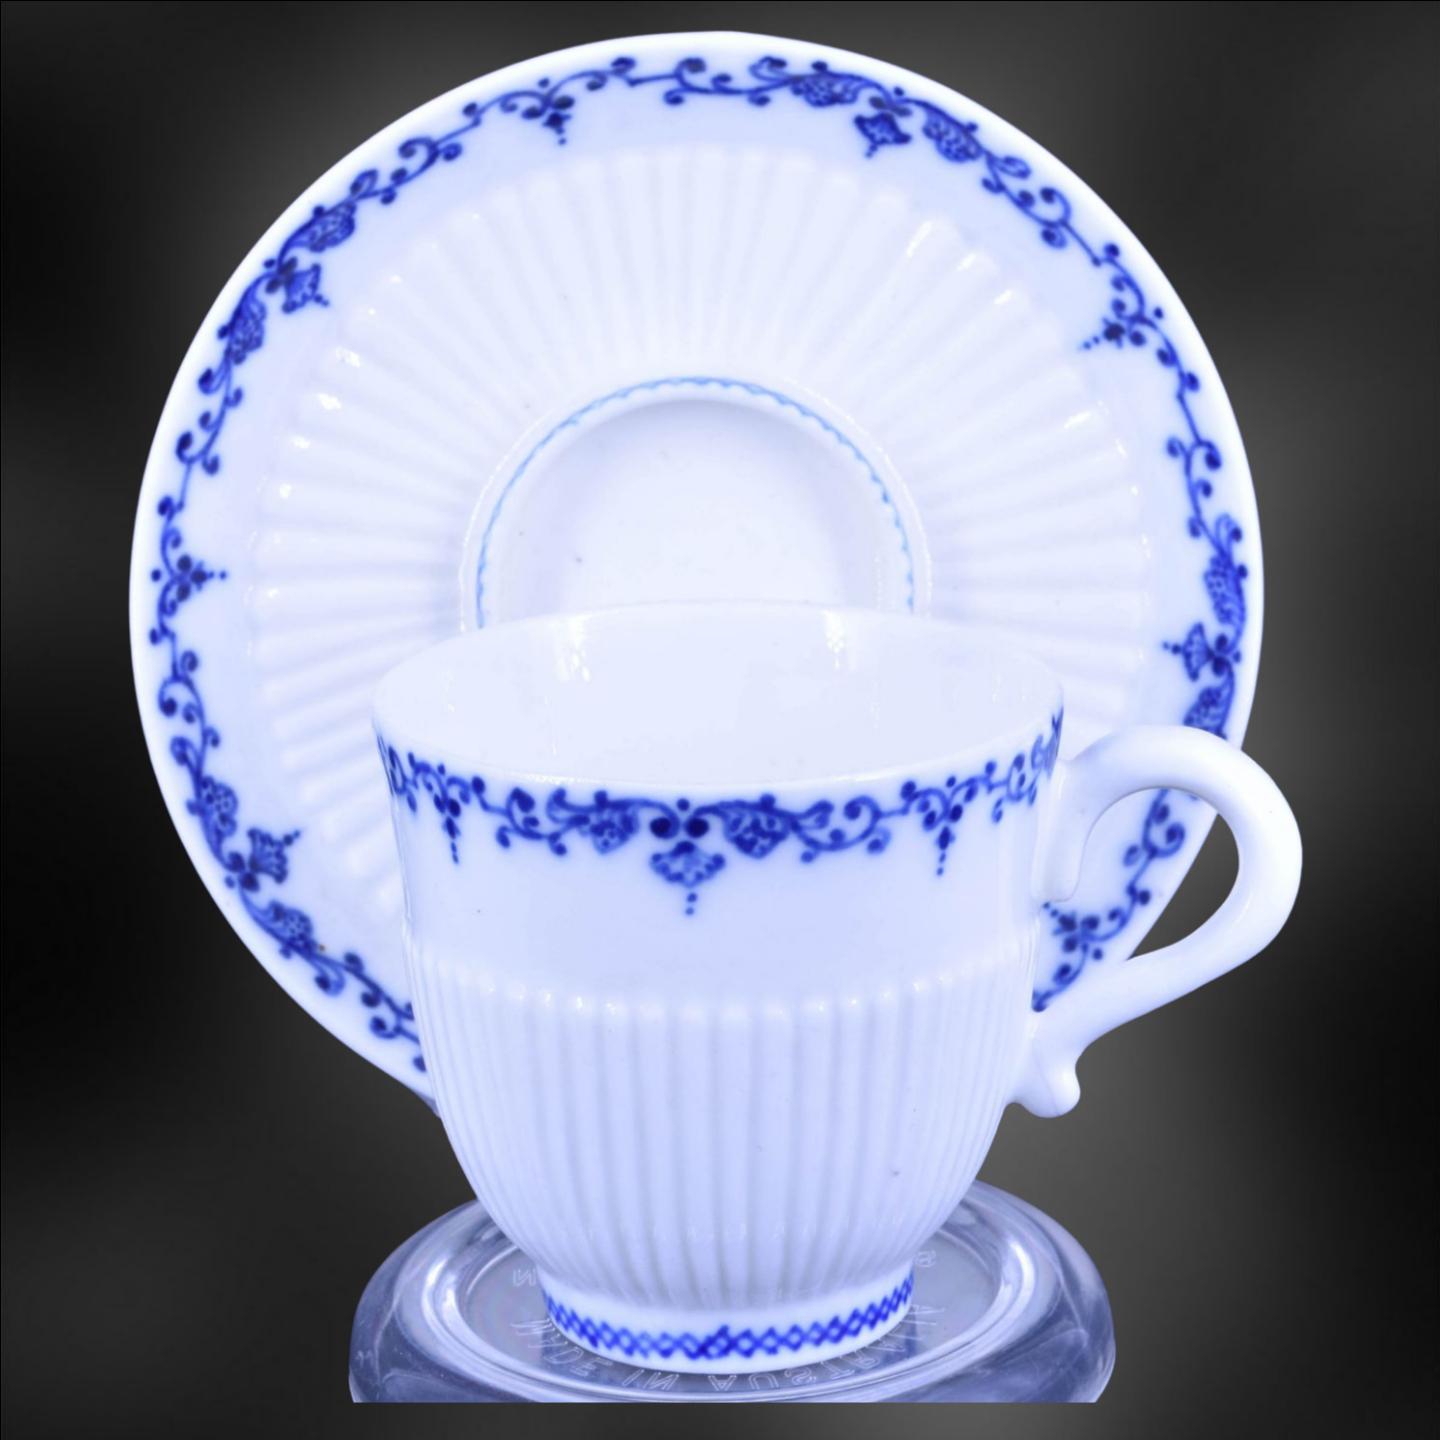 Both cup and saucer with moulded reeding and decorated in underglaze blue with scrolled lambrequin borders.

Saint Cloud porcelain is a type of soft-paste porcelain produced in the French town of Saint Cloud from the late 17th century to the